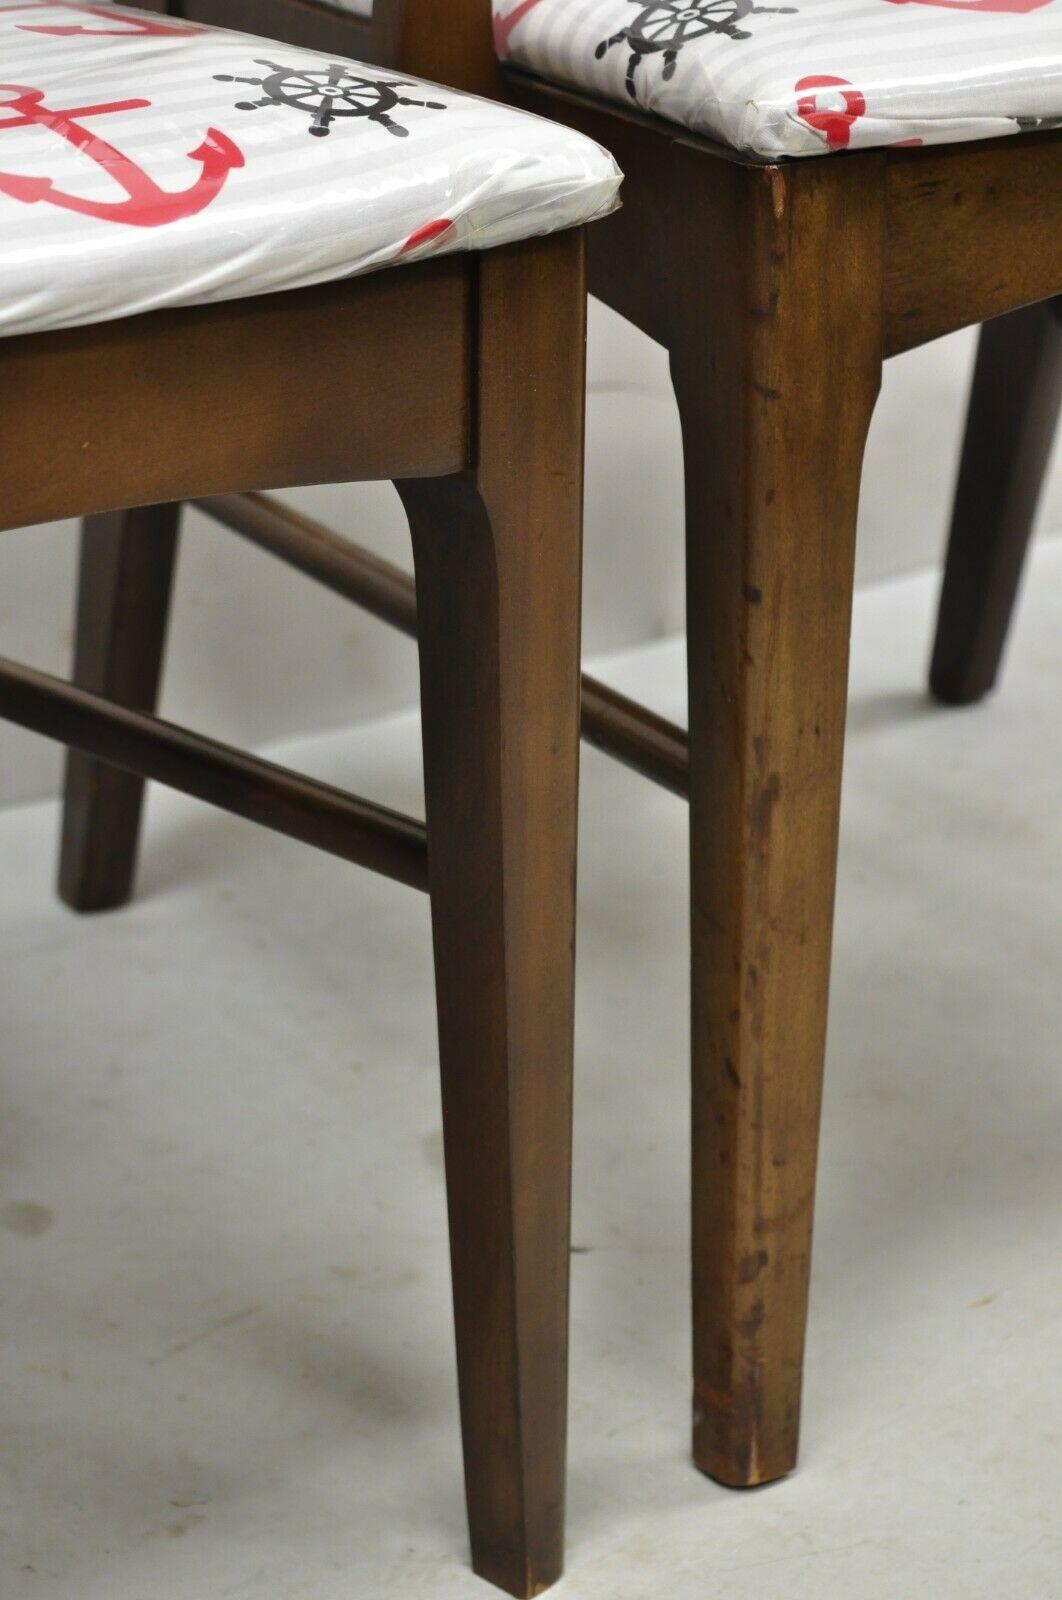 Vintage Mid Century Modern Walnut Dining Room Chairs - Set of 6 For Sale 5